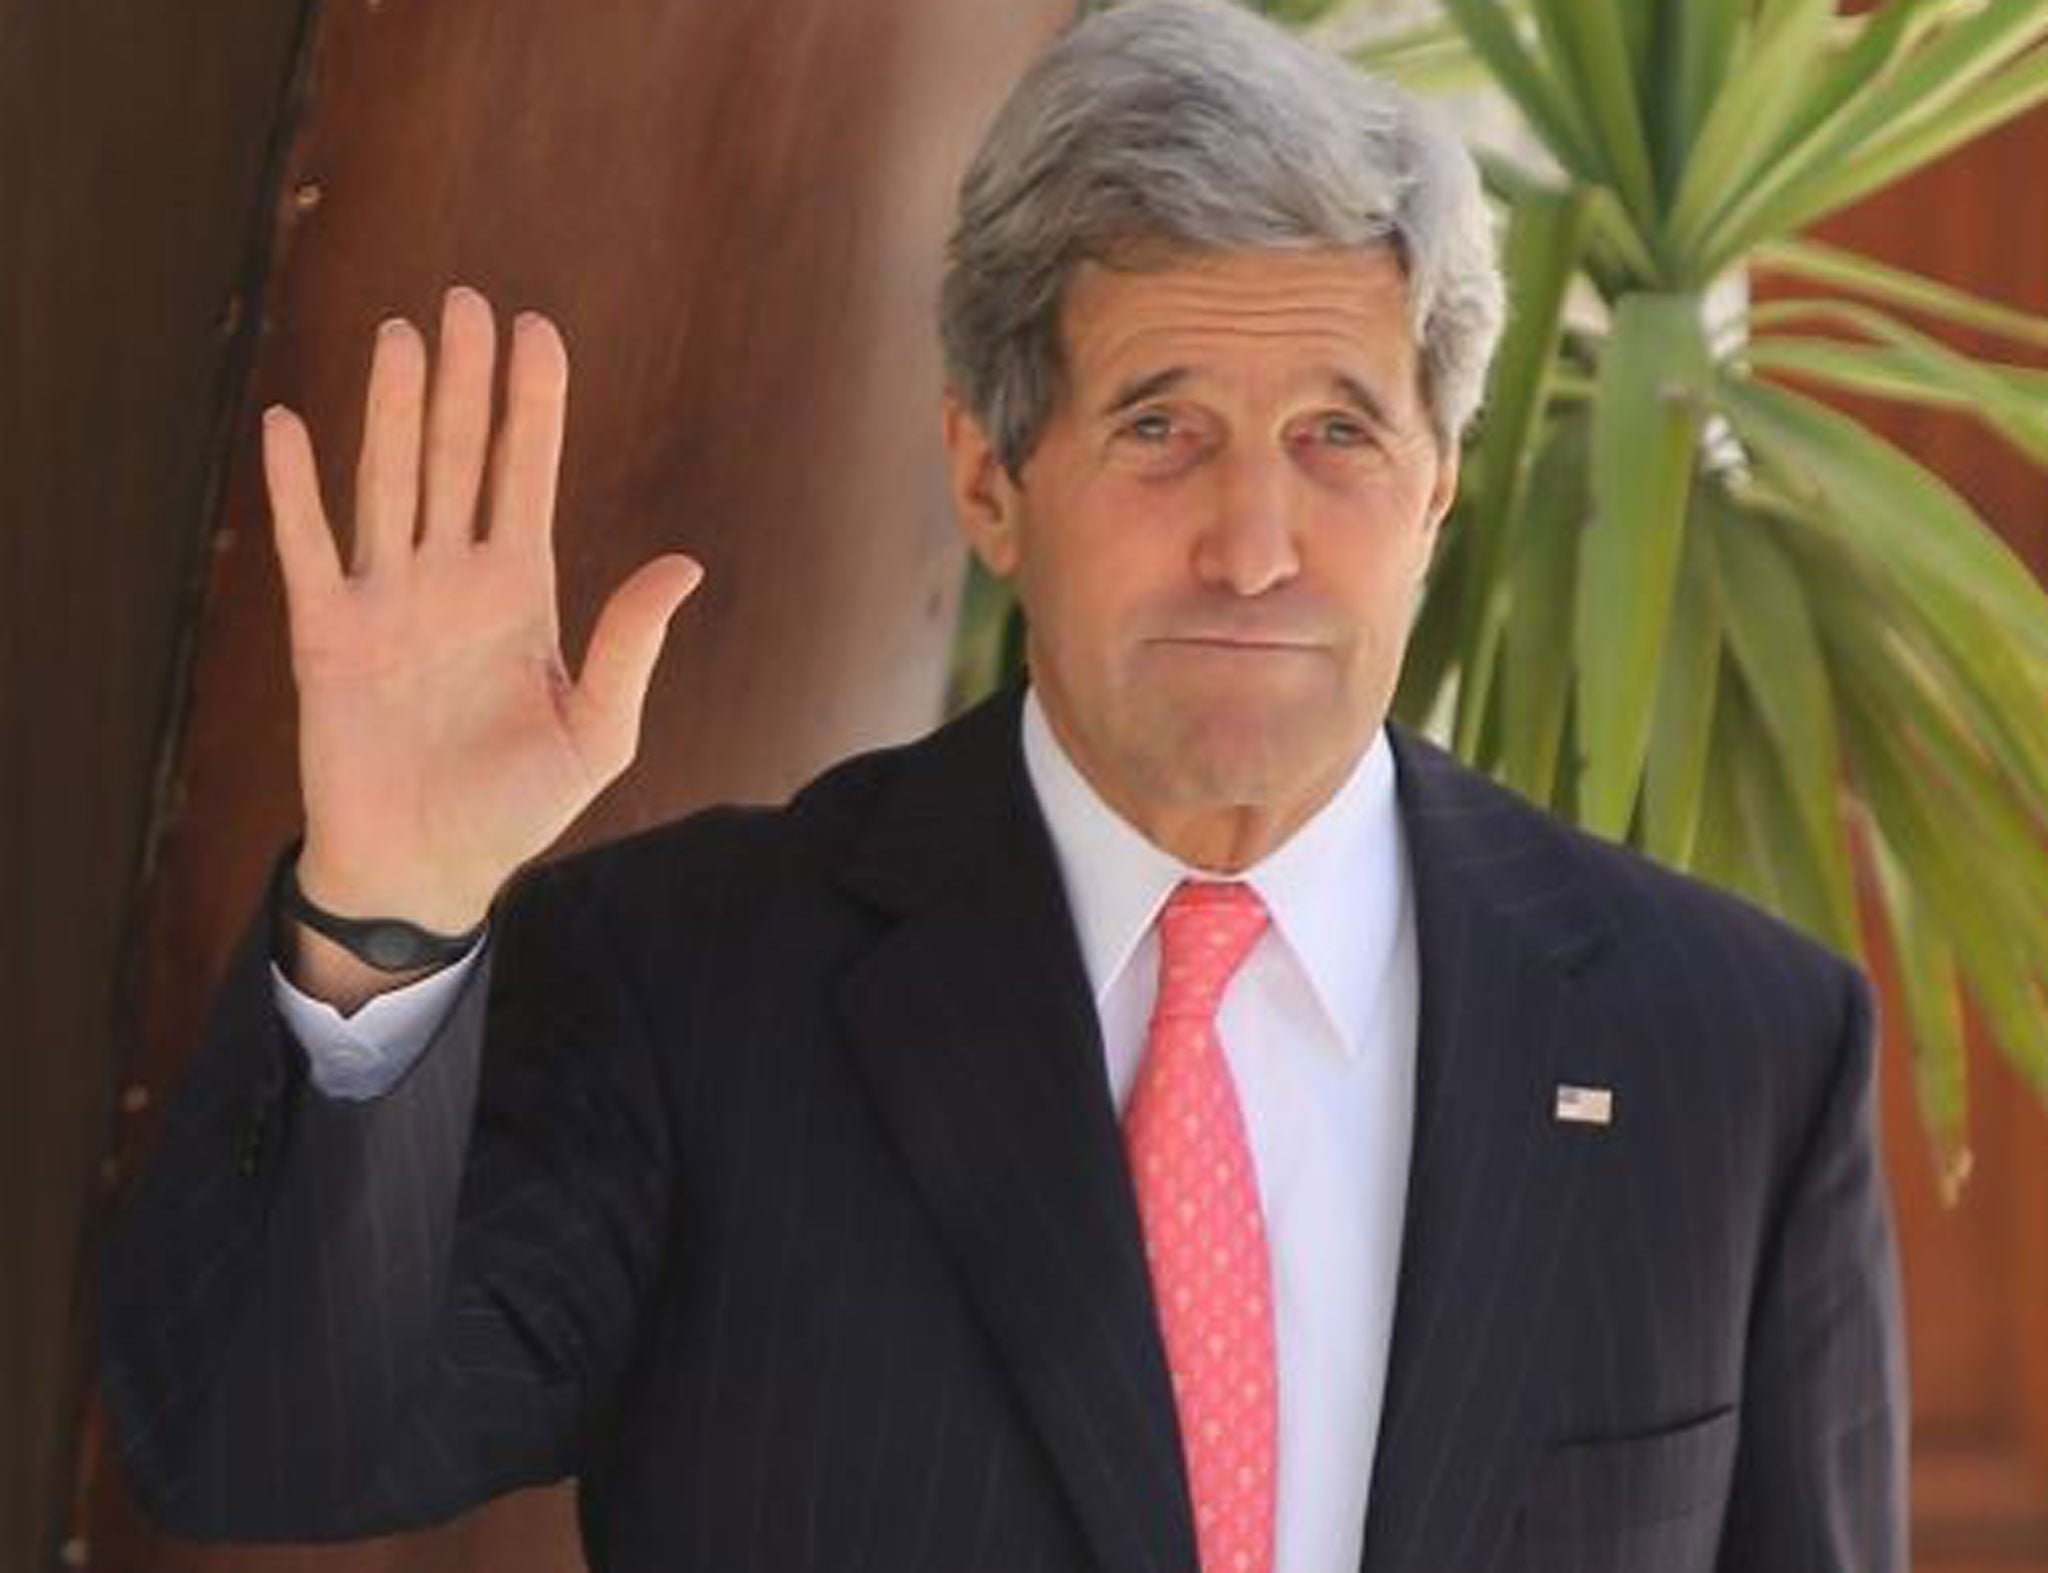 John Kerry's Israel visit is the fourth in as many months